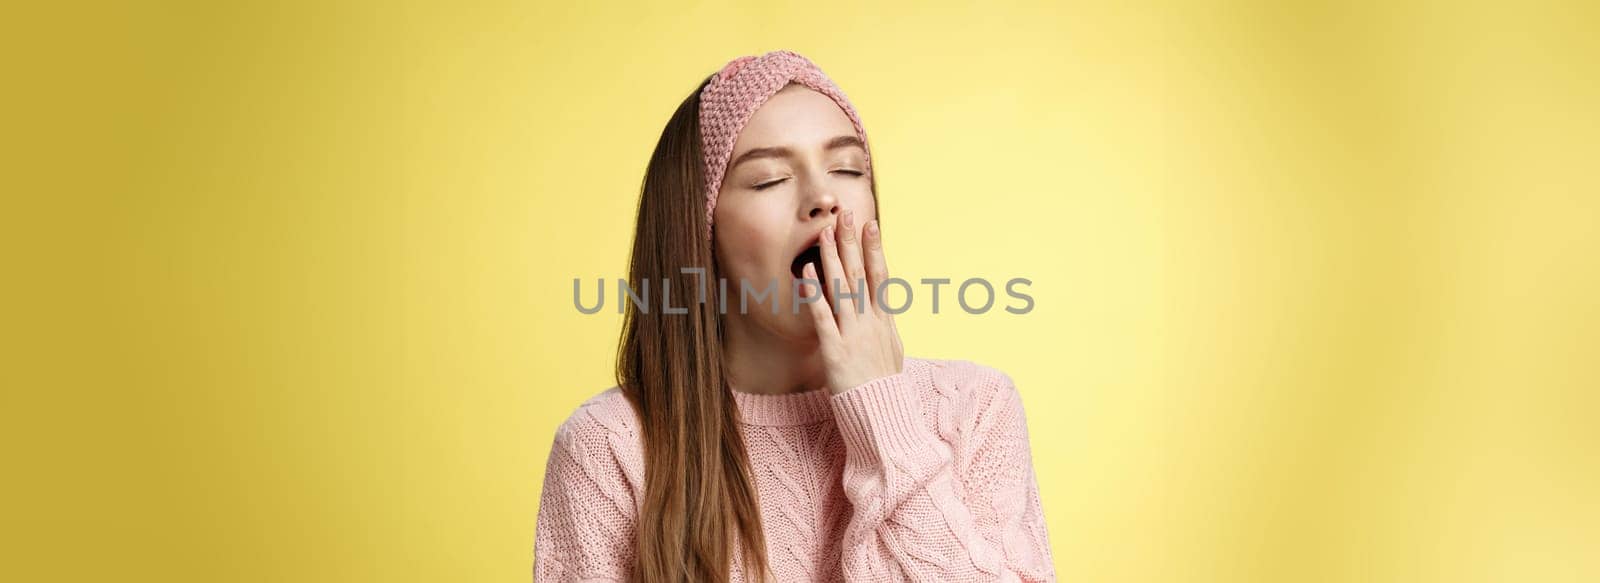 Time to bed. Portrait of tired cute sleepy girlfriend wearing sweater, knitted headband yawning cute with closed eyes opened mouth covered with palm, exhausted, wanting sleep, dreaming fall asleep.